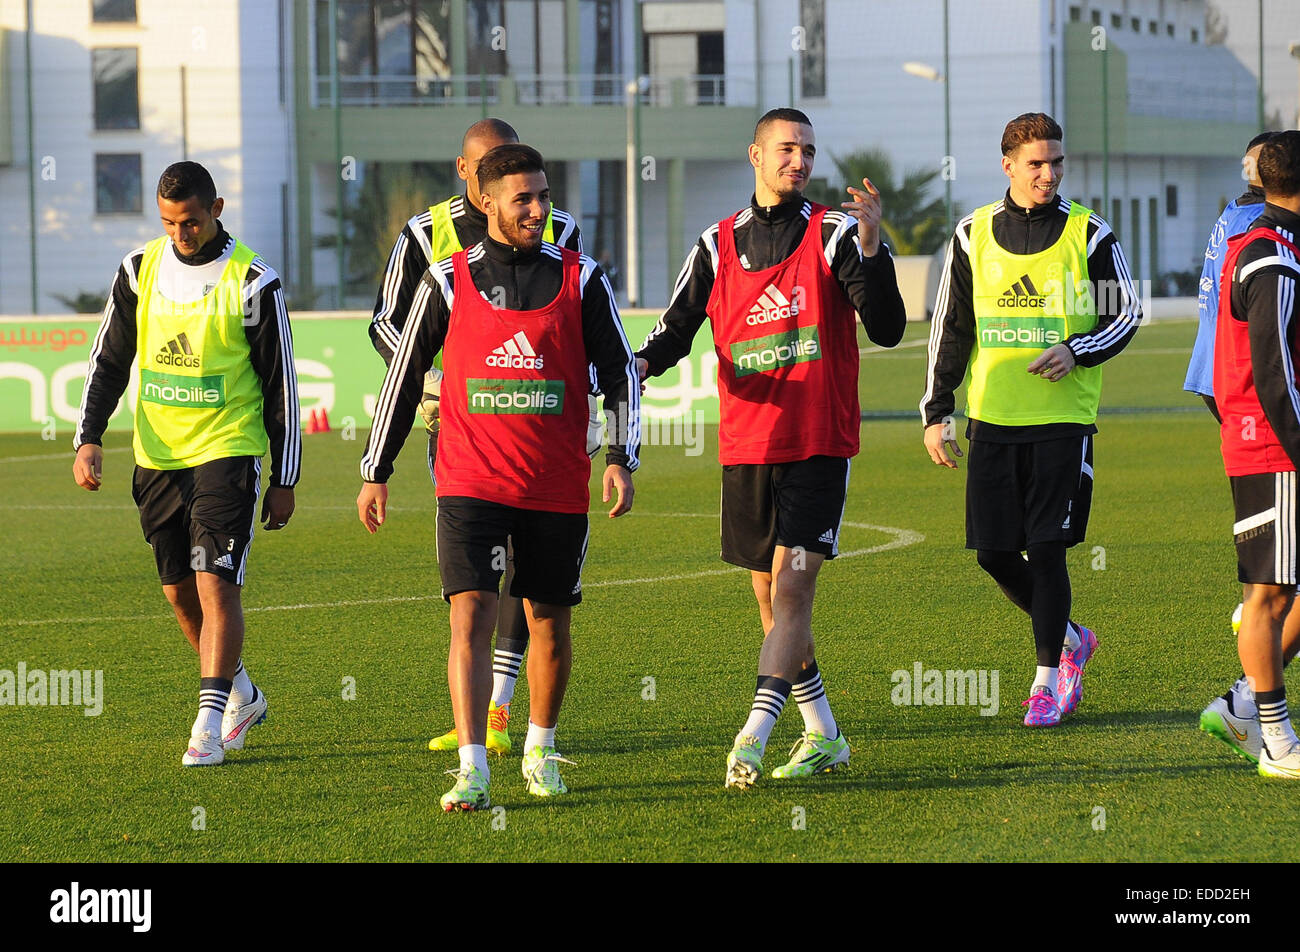 Algiers. 6th Jan, 2015. Algerian national football team players attend a training session in Algiers, capital of Algeria, Jan. 5, 2015. The 2015 Africa Cup of Nations will be held in Equatorial Guinea from Jan. 17 to Feb. 8. © Xinhua/Alamy Live News Stock Photo